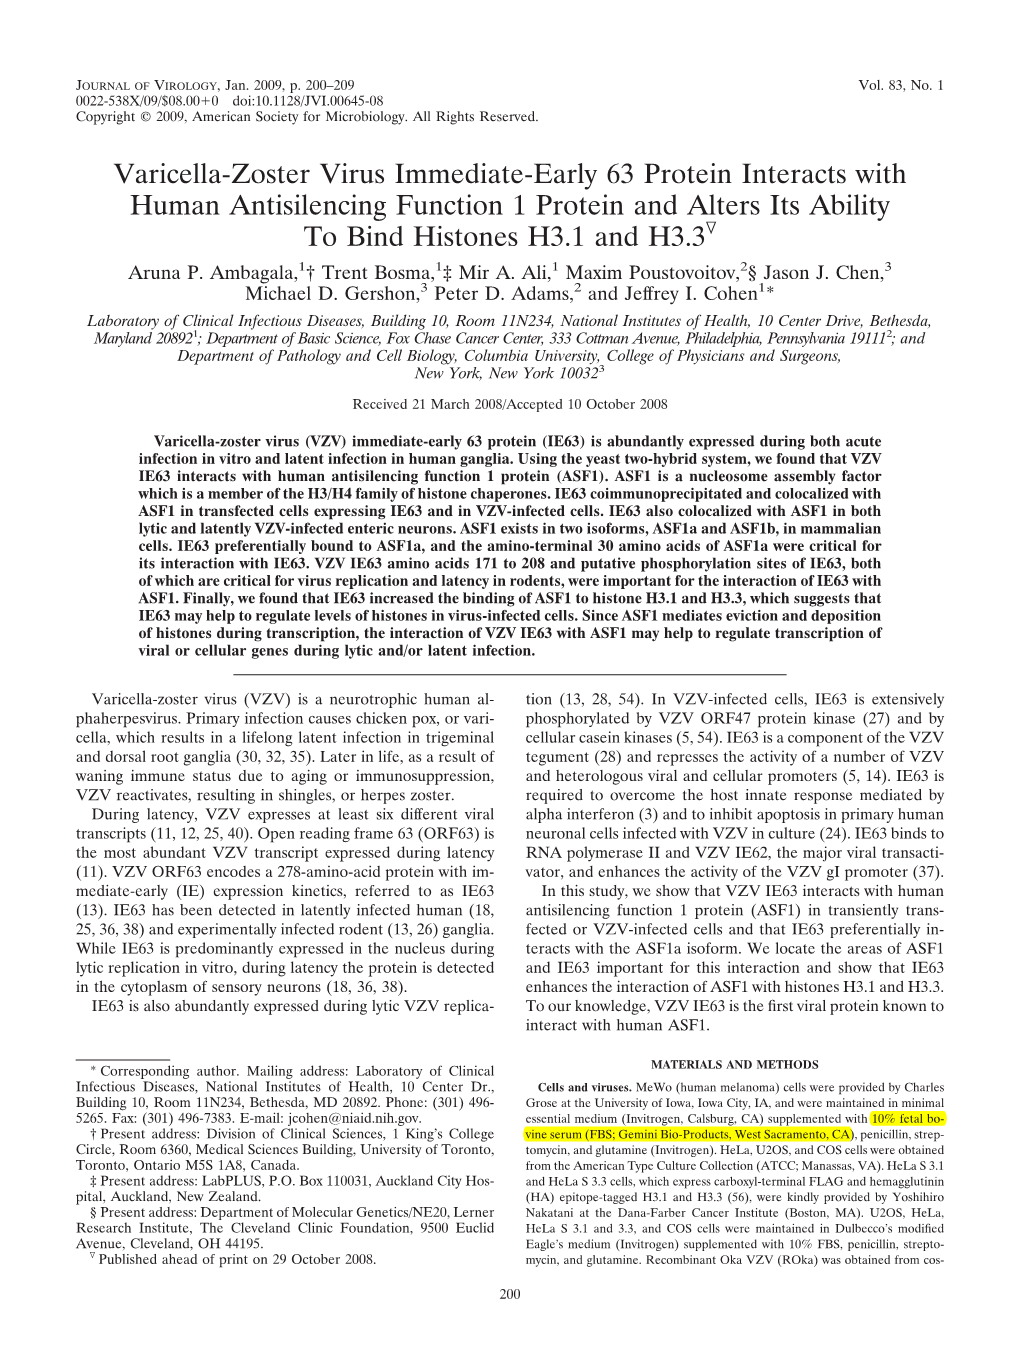 Varicella-Zoster Virus Immediate-Early 63 Protein Interacts with Human Antisilencing Function 1 Protein and Alters Its Ability to Bind Histones H3.1 and H3.3ᰔ Aruna P